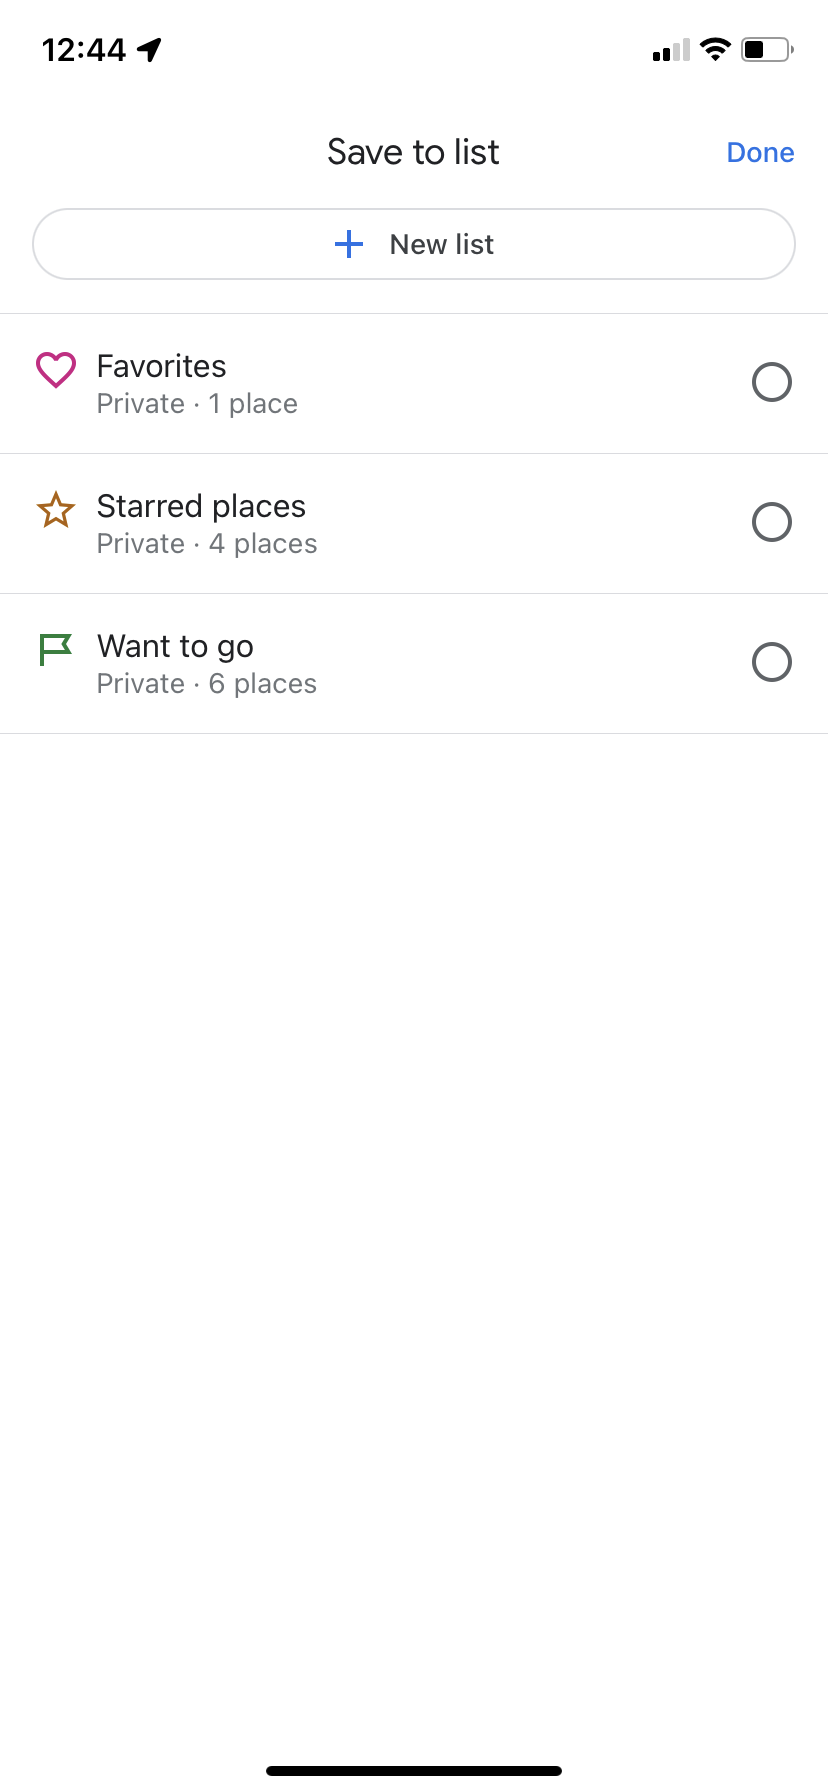 The "Save to list" screen in the Google Maps app.